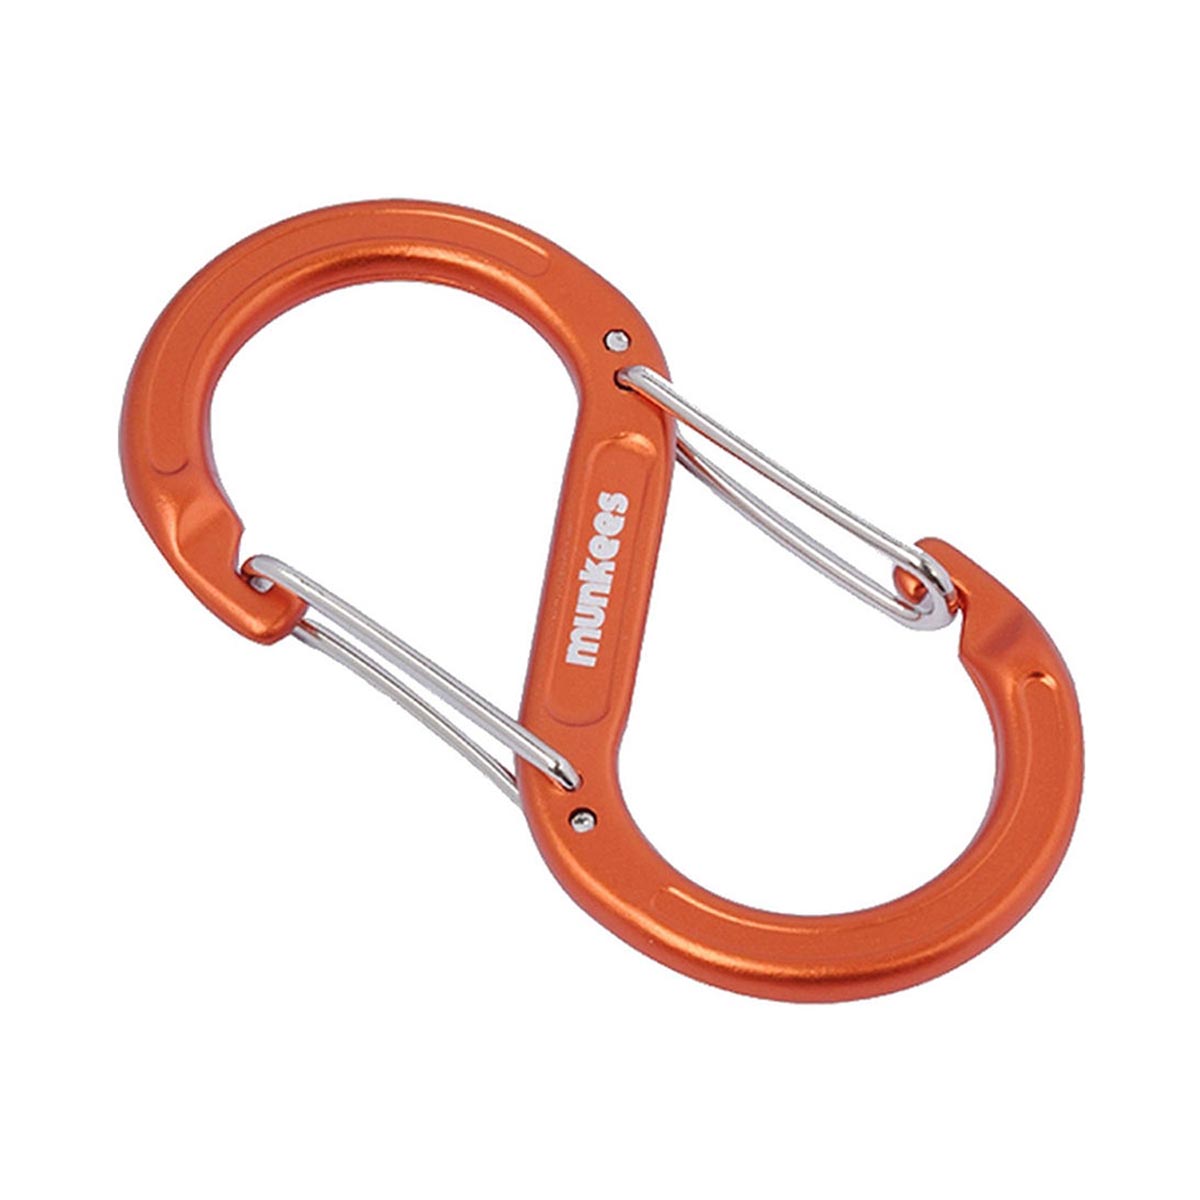 MUNKEES - FORGED S-SHAPED CARABINER